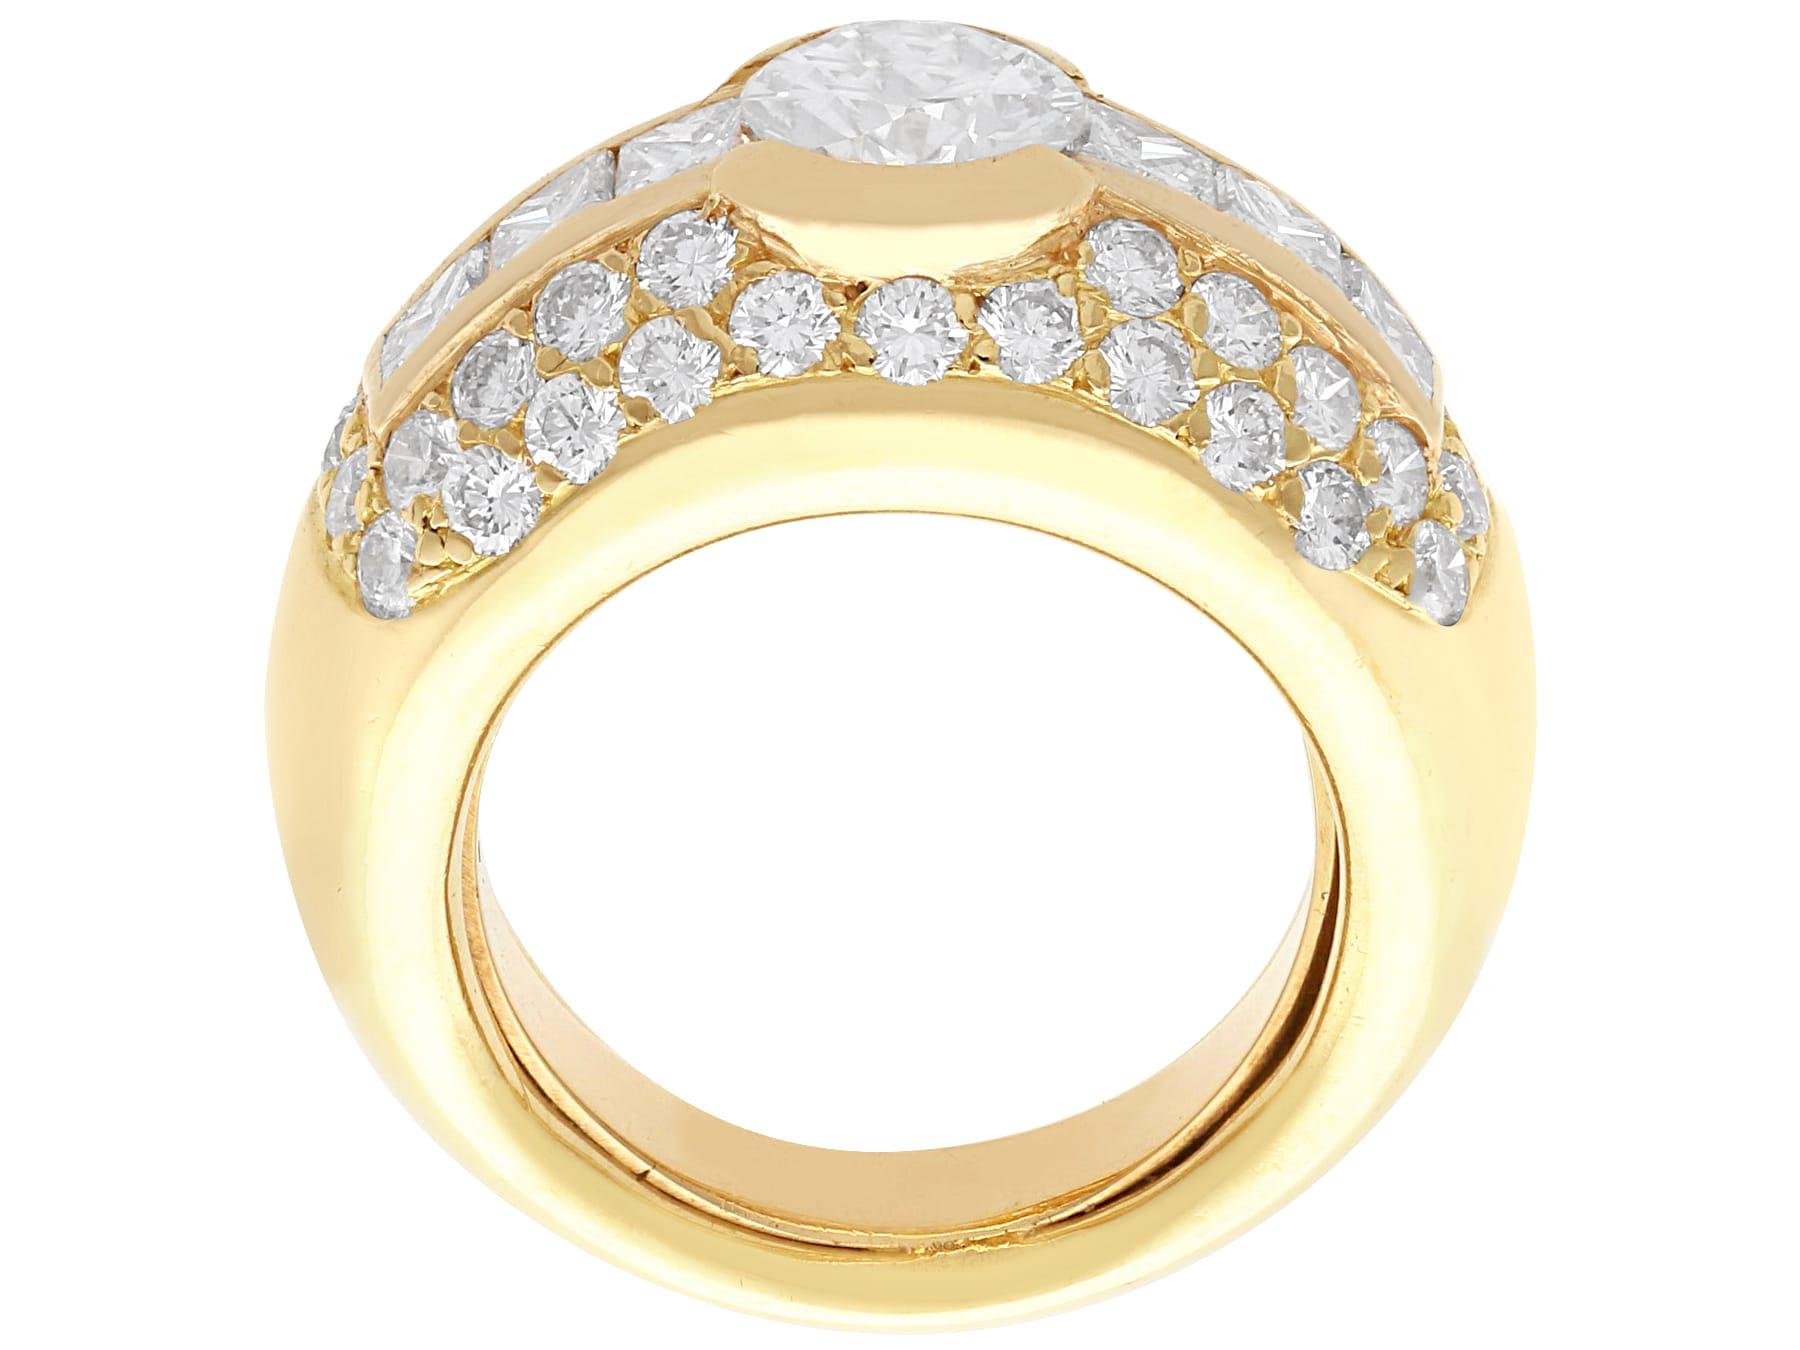 Women's or Men's Vintage 3.98 Carat Diamond and 18 Carat Yellow Gold Ring For Sale